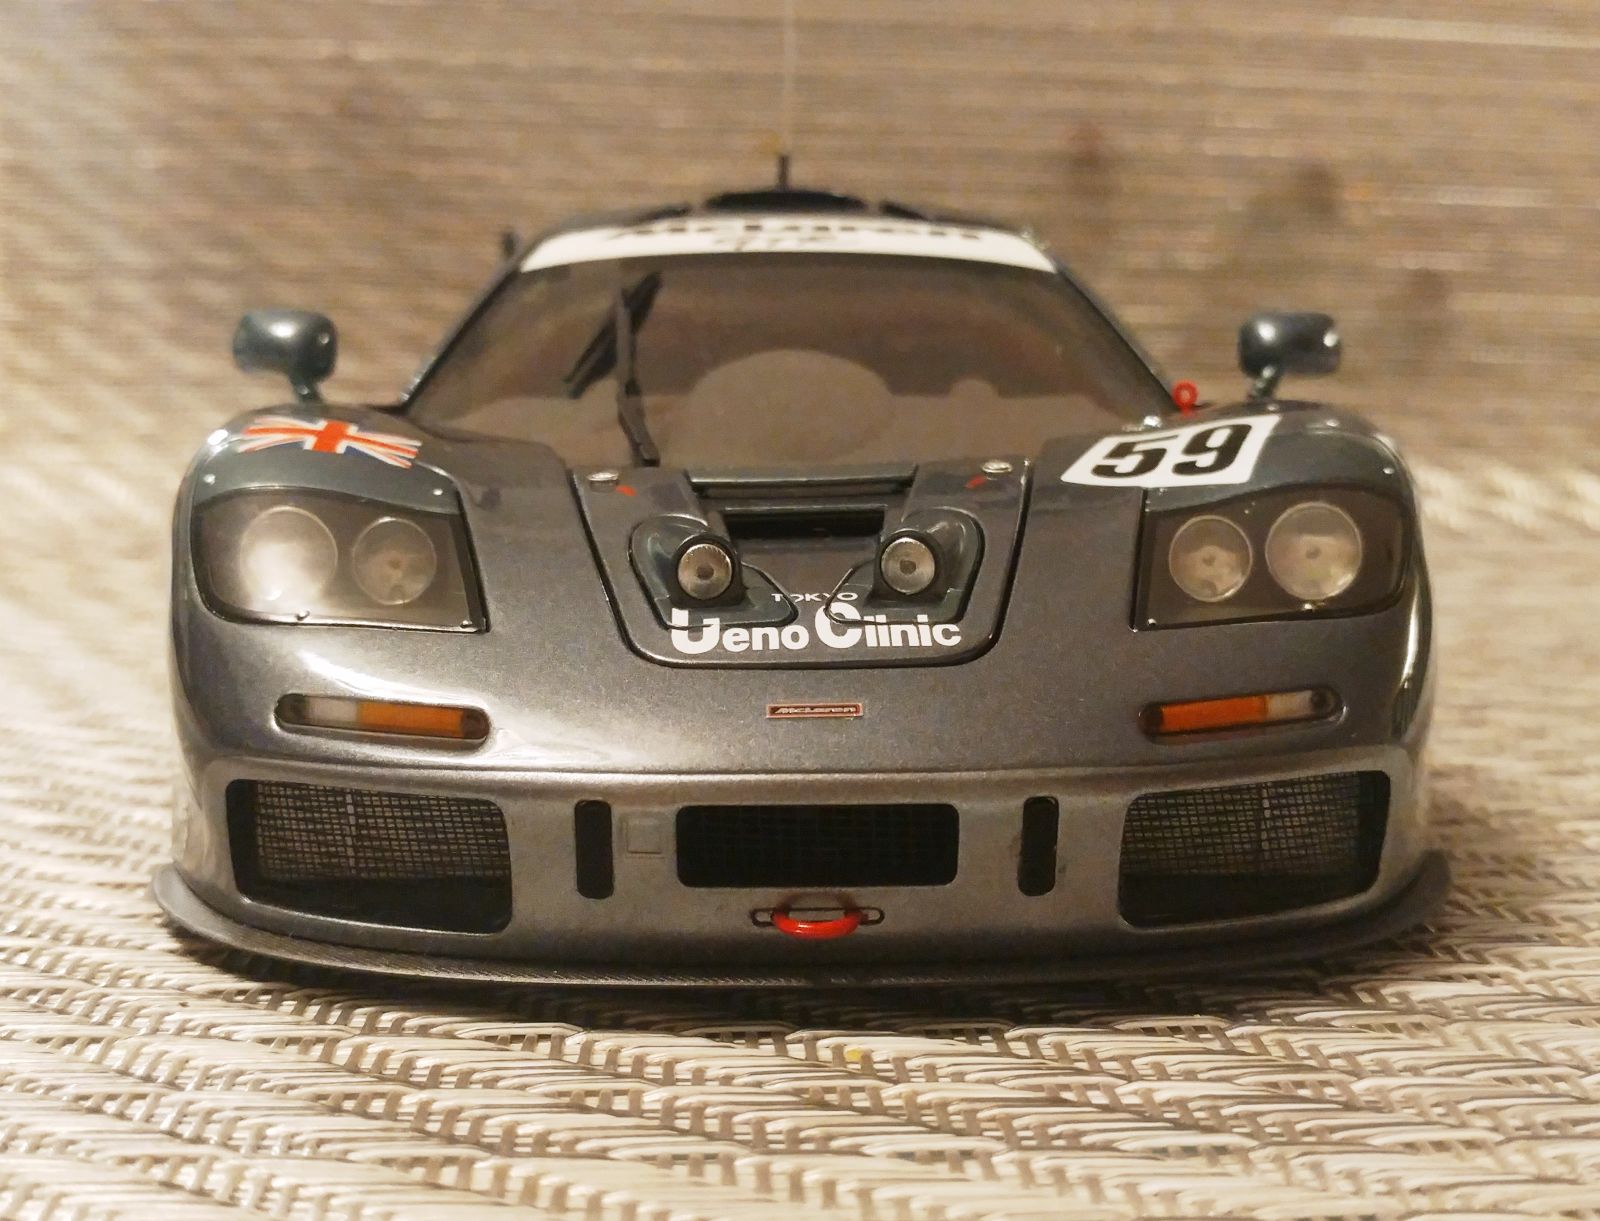 Illustration for article titled Woking Wednesday: McLaren F1 GTR Ueno Clinic